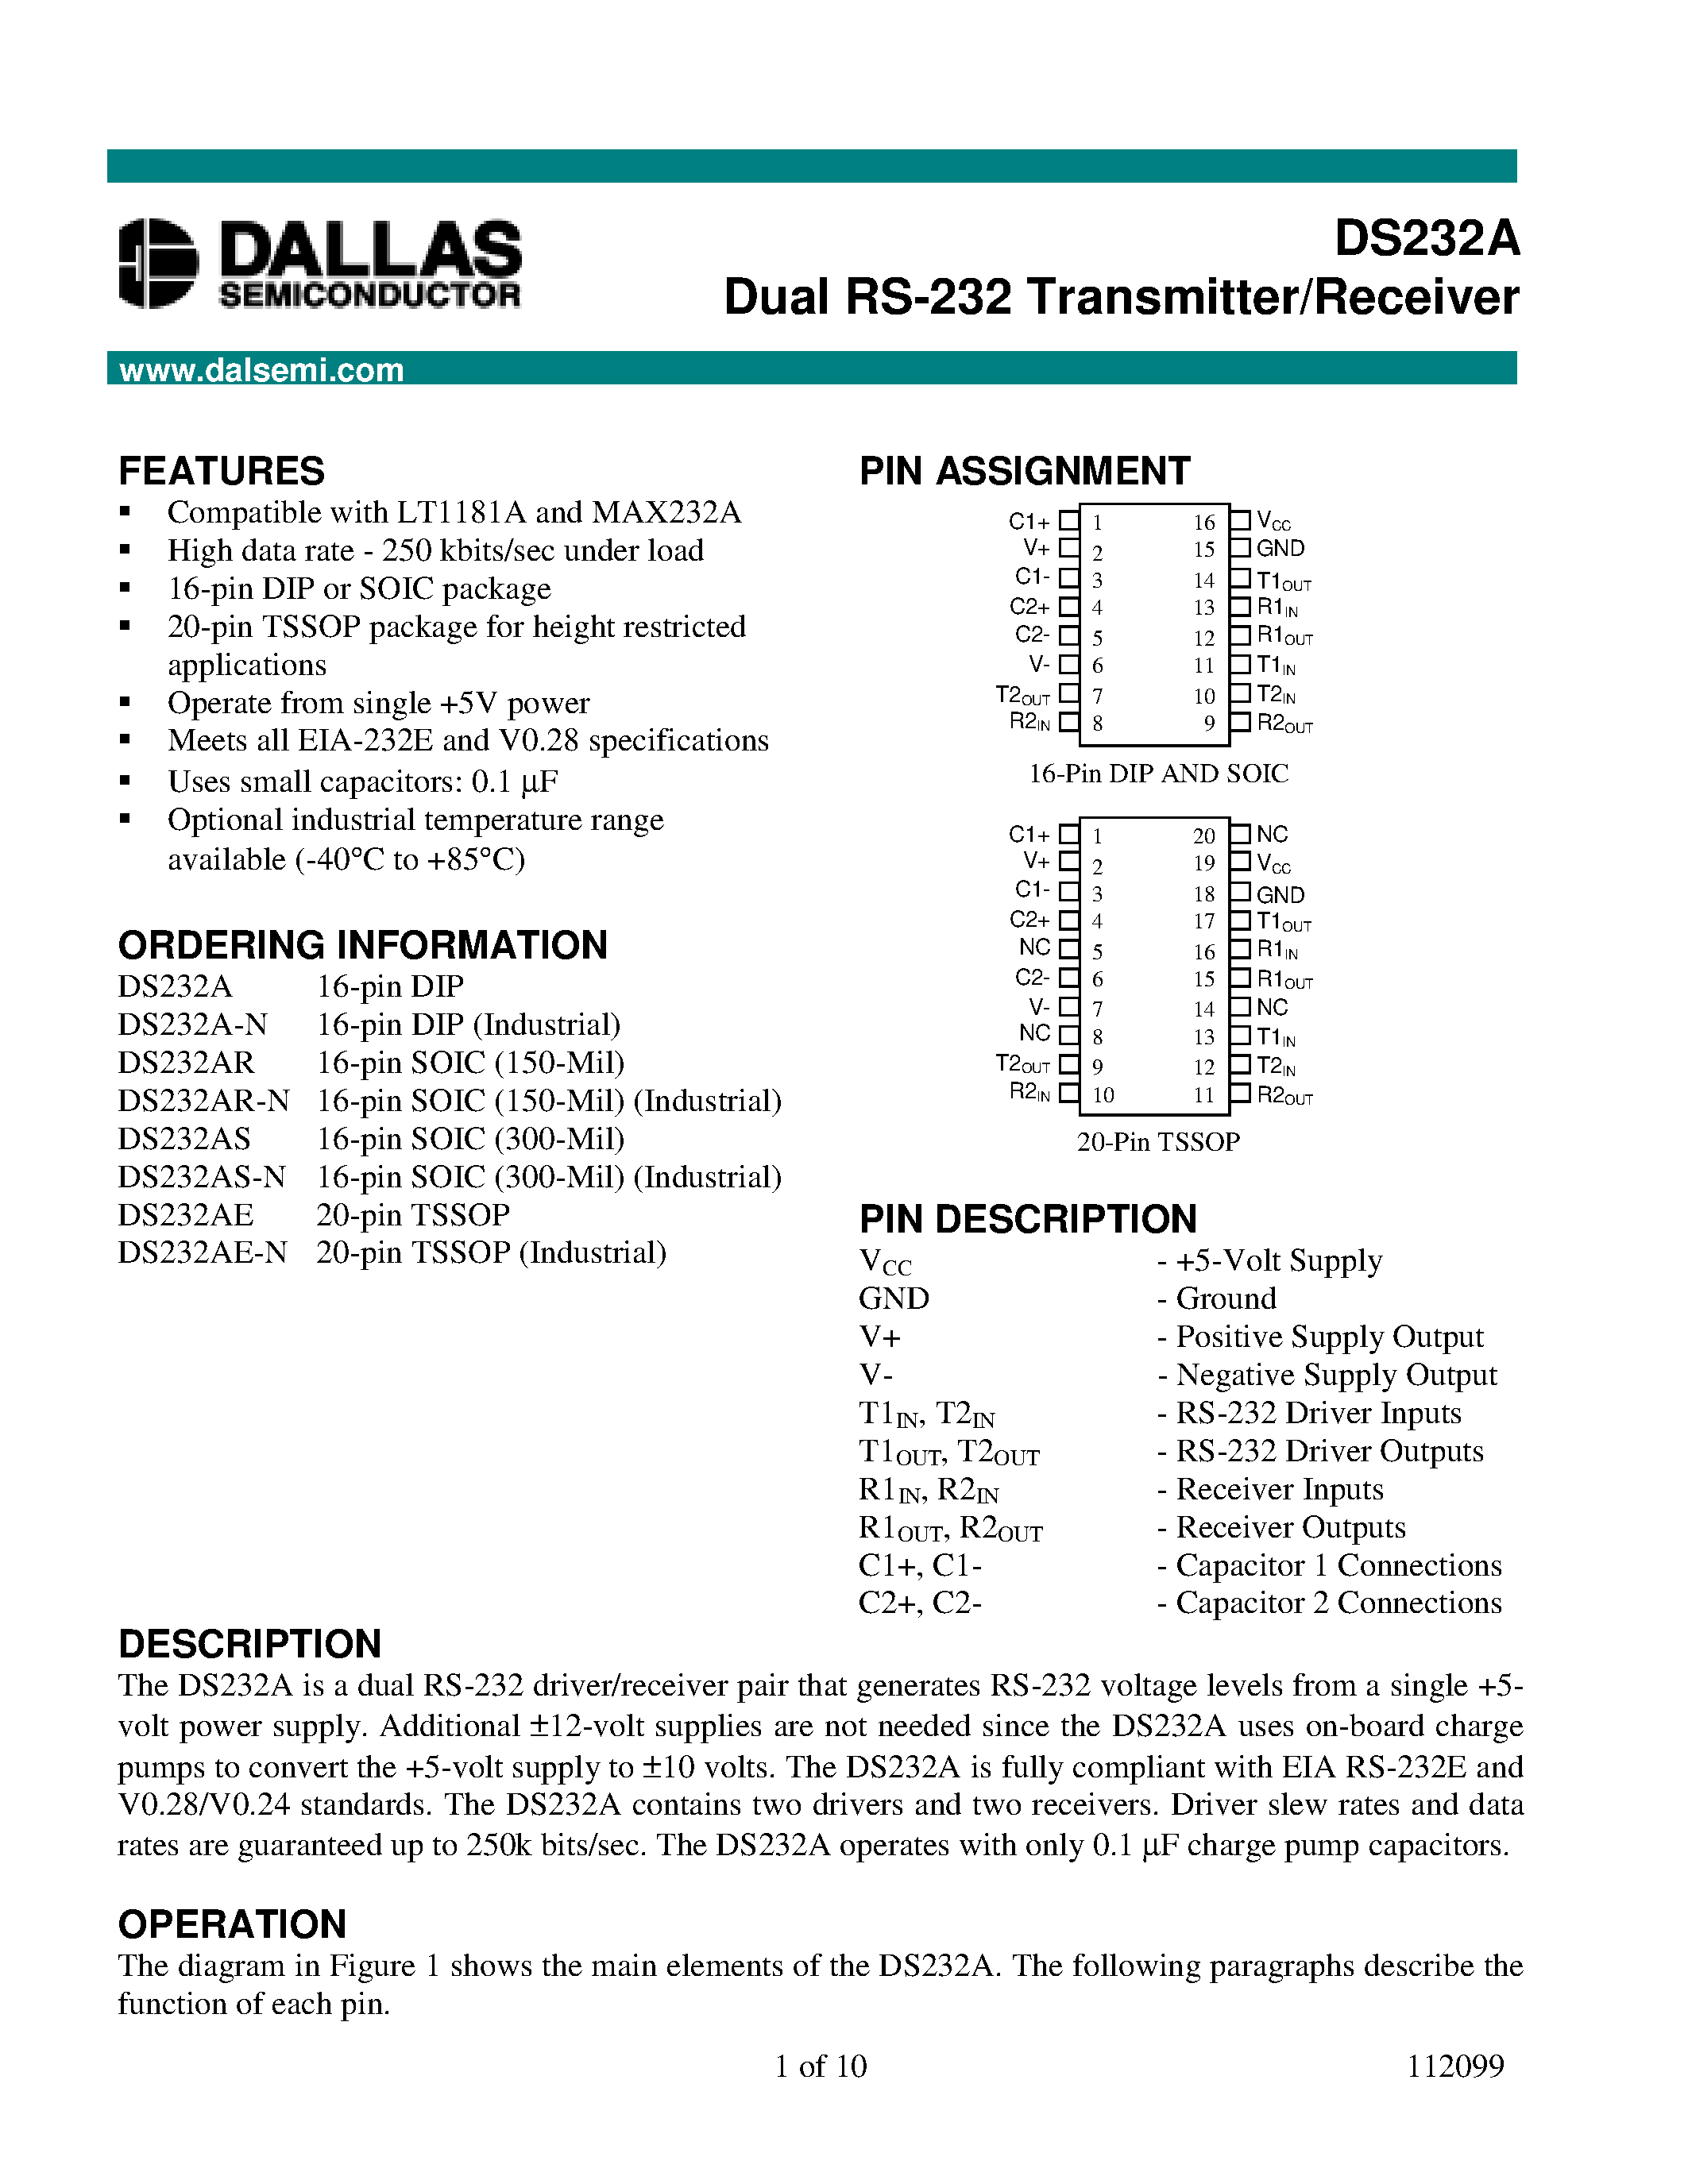 Даташит DS232AE-N - Dual RS-232 Transmitter/Receiver страница 1